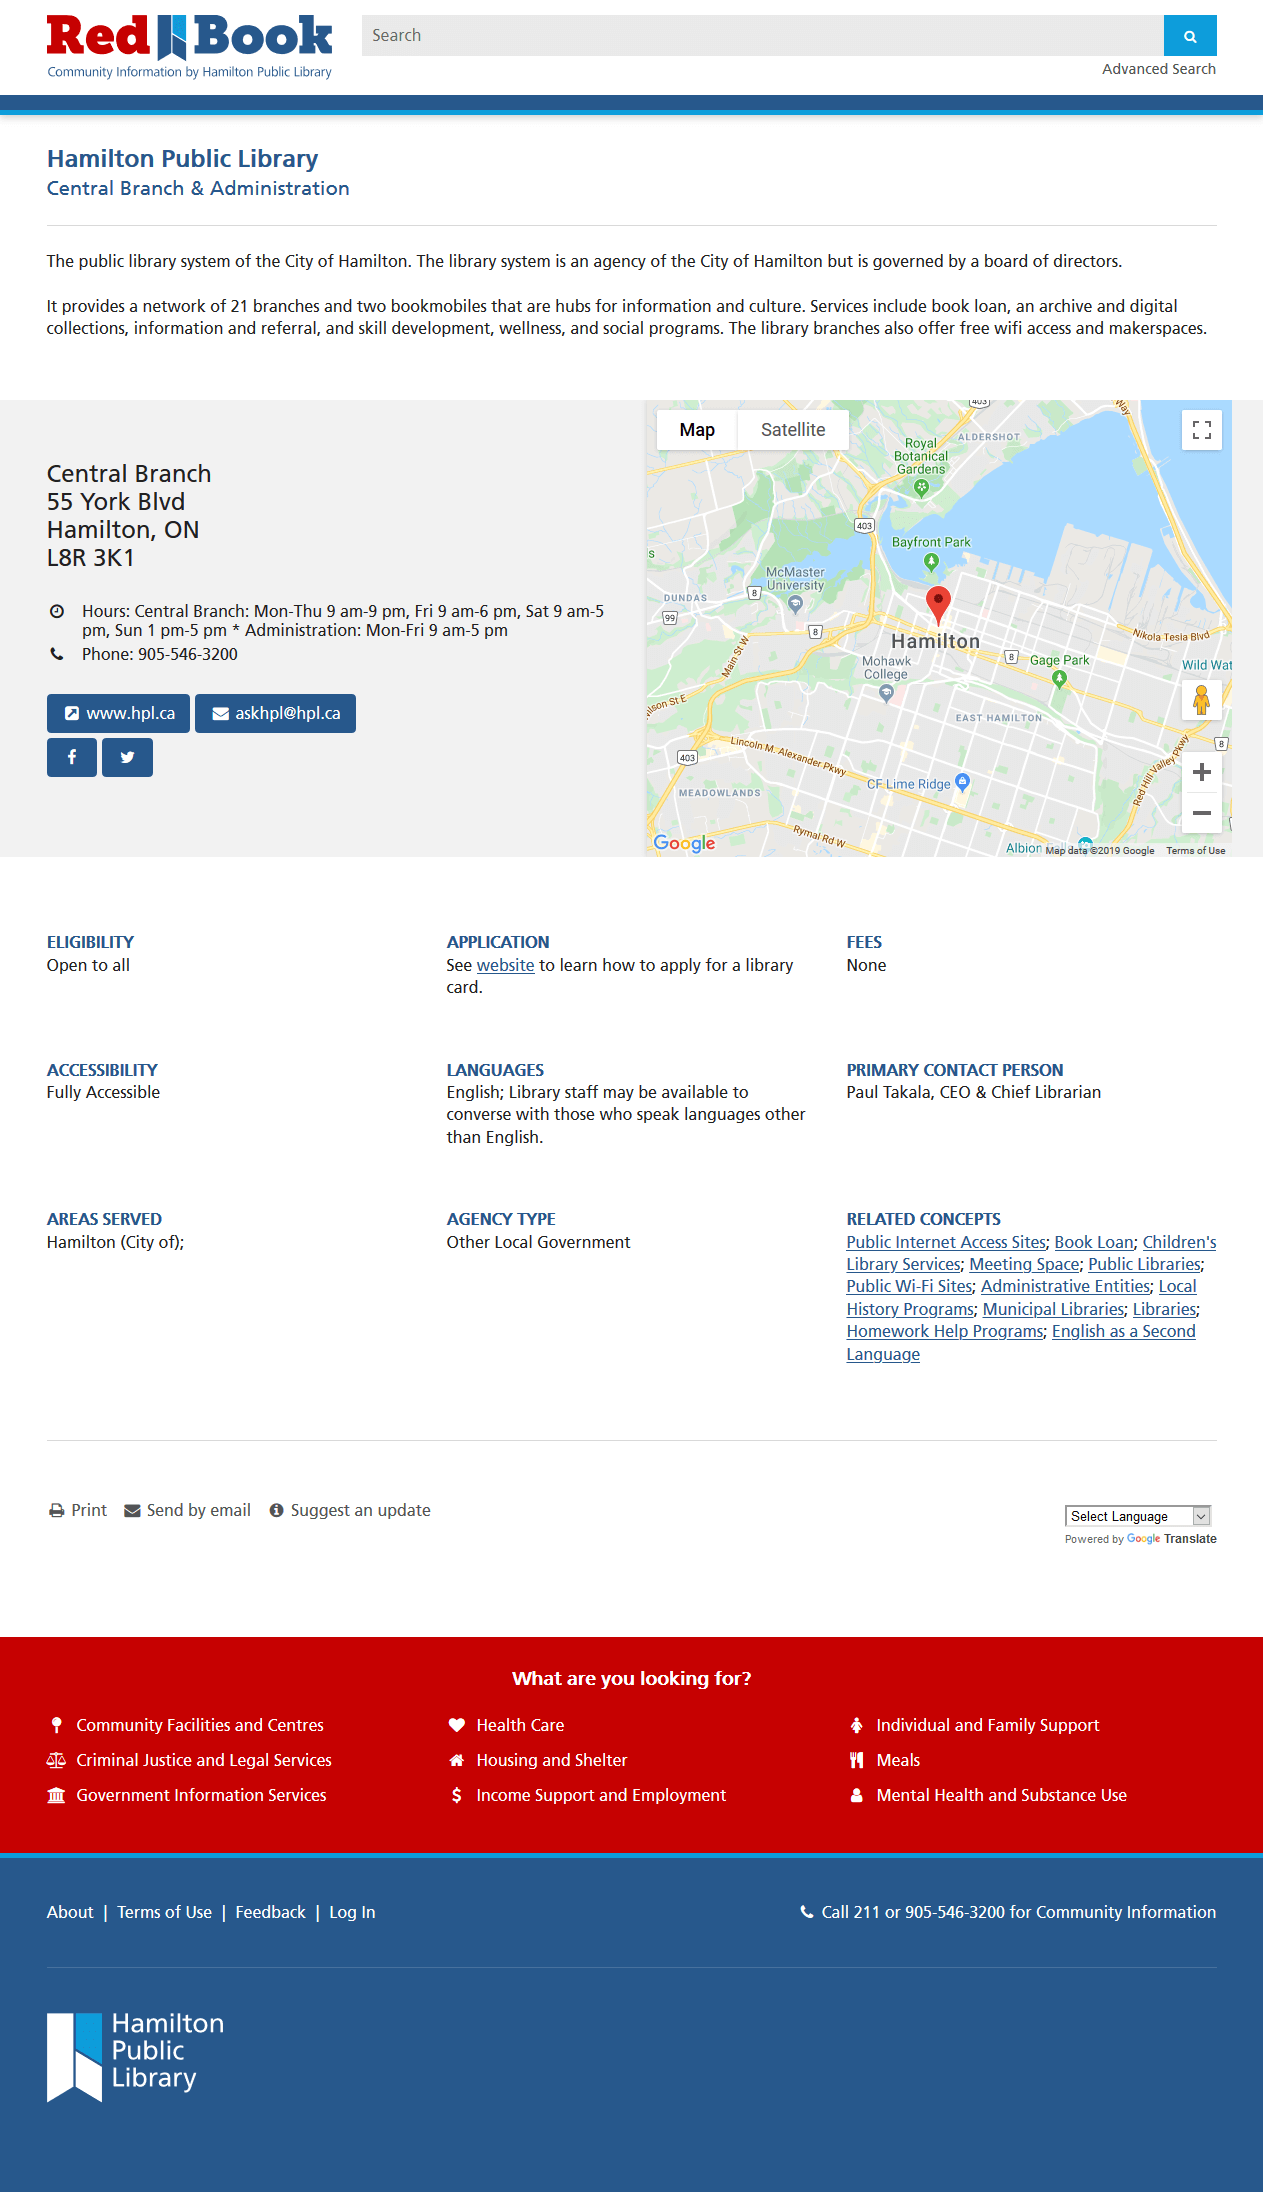 Page for an individual resource showing full description, contact and location information, links, and additional fields